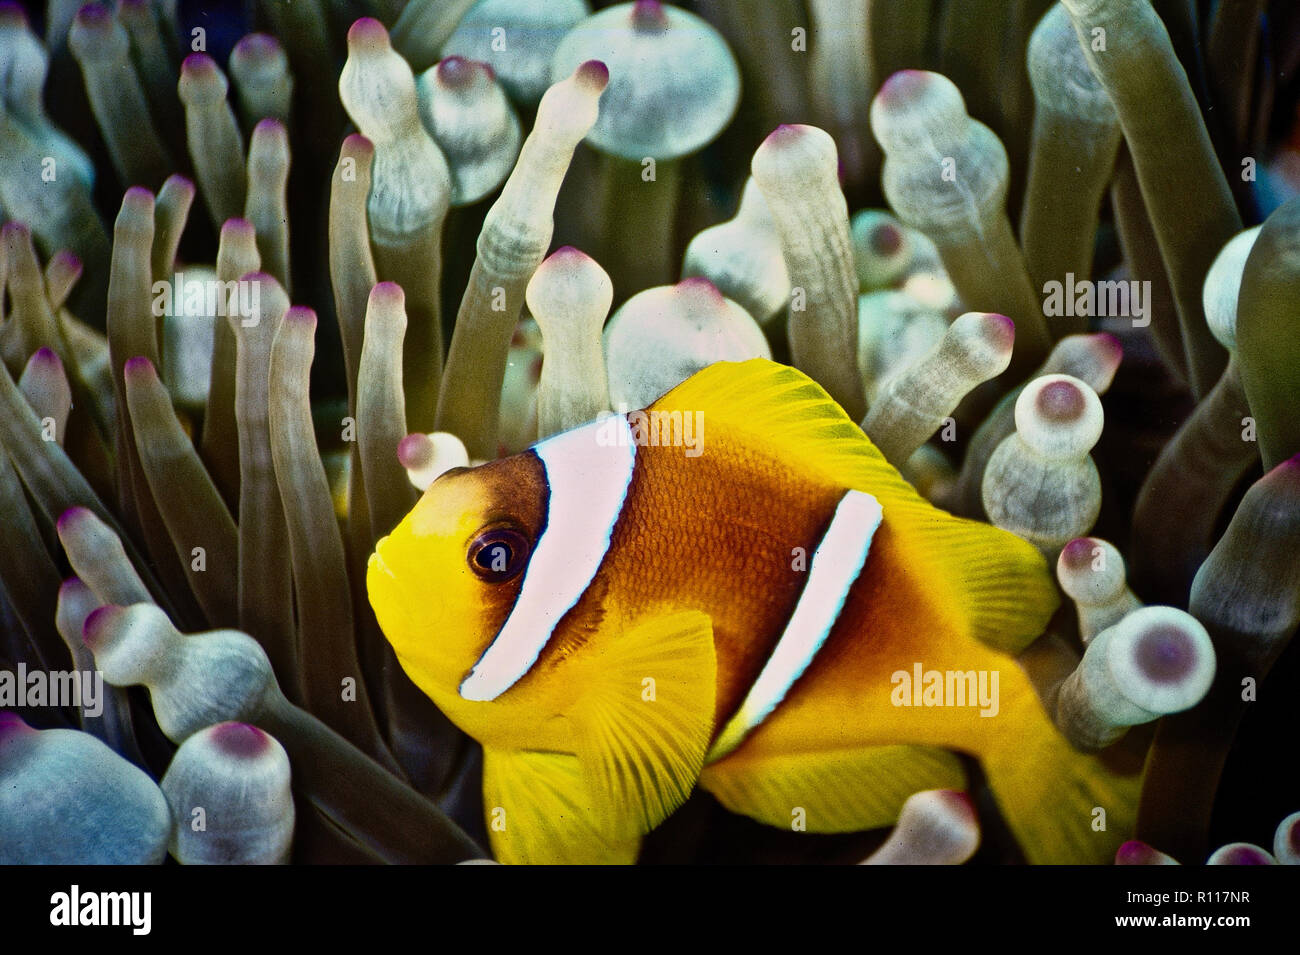 A clownfish (Amphiprion bicinctus: 6 cms.) sheltering in its host anemone (Entacmaea quadricolor). Clownfish have symbiotic relationships with anemones, which they protect from predatory attack in exchange for a place of refuge. They are doughty defenders of their habitats and will sometimes even attempt to chase away approaching divers! If they feel threatened, they hide amongst the anemone's many tentacles, to the stinging nematocysts of which they are immune. Various species of clownfish are commonly encountered on coral reefs, where they feed mainly on copepods and algae. Egyptian Red Sea. Stock Photo